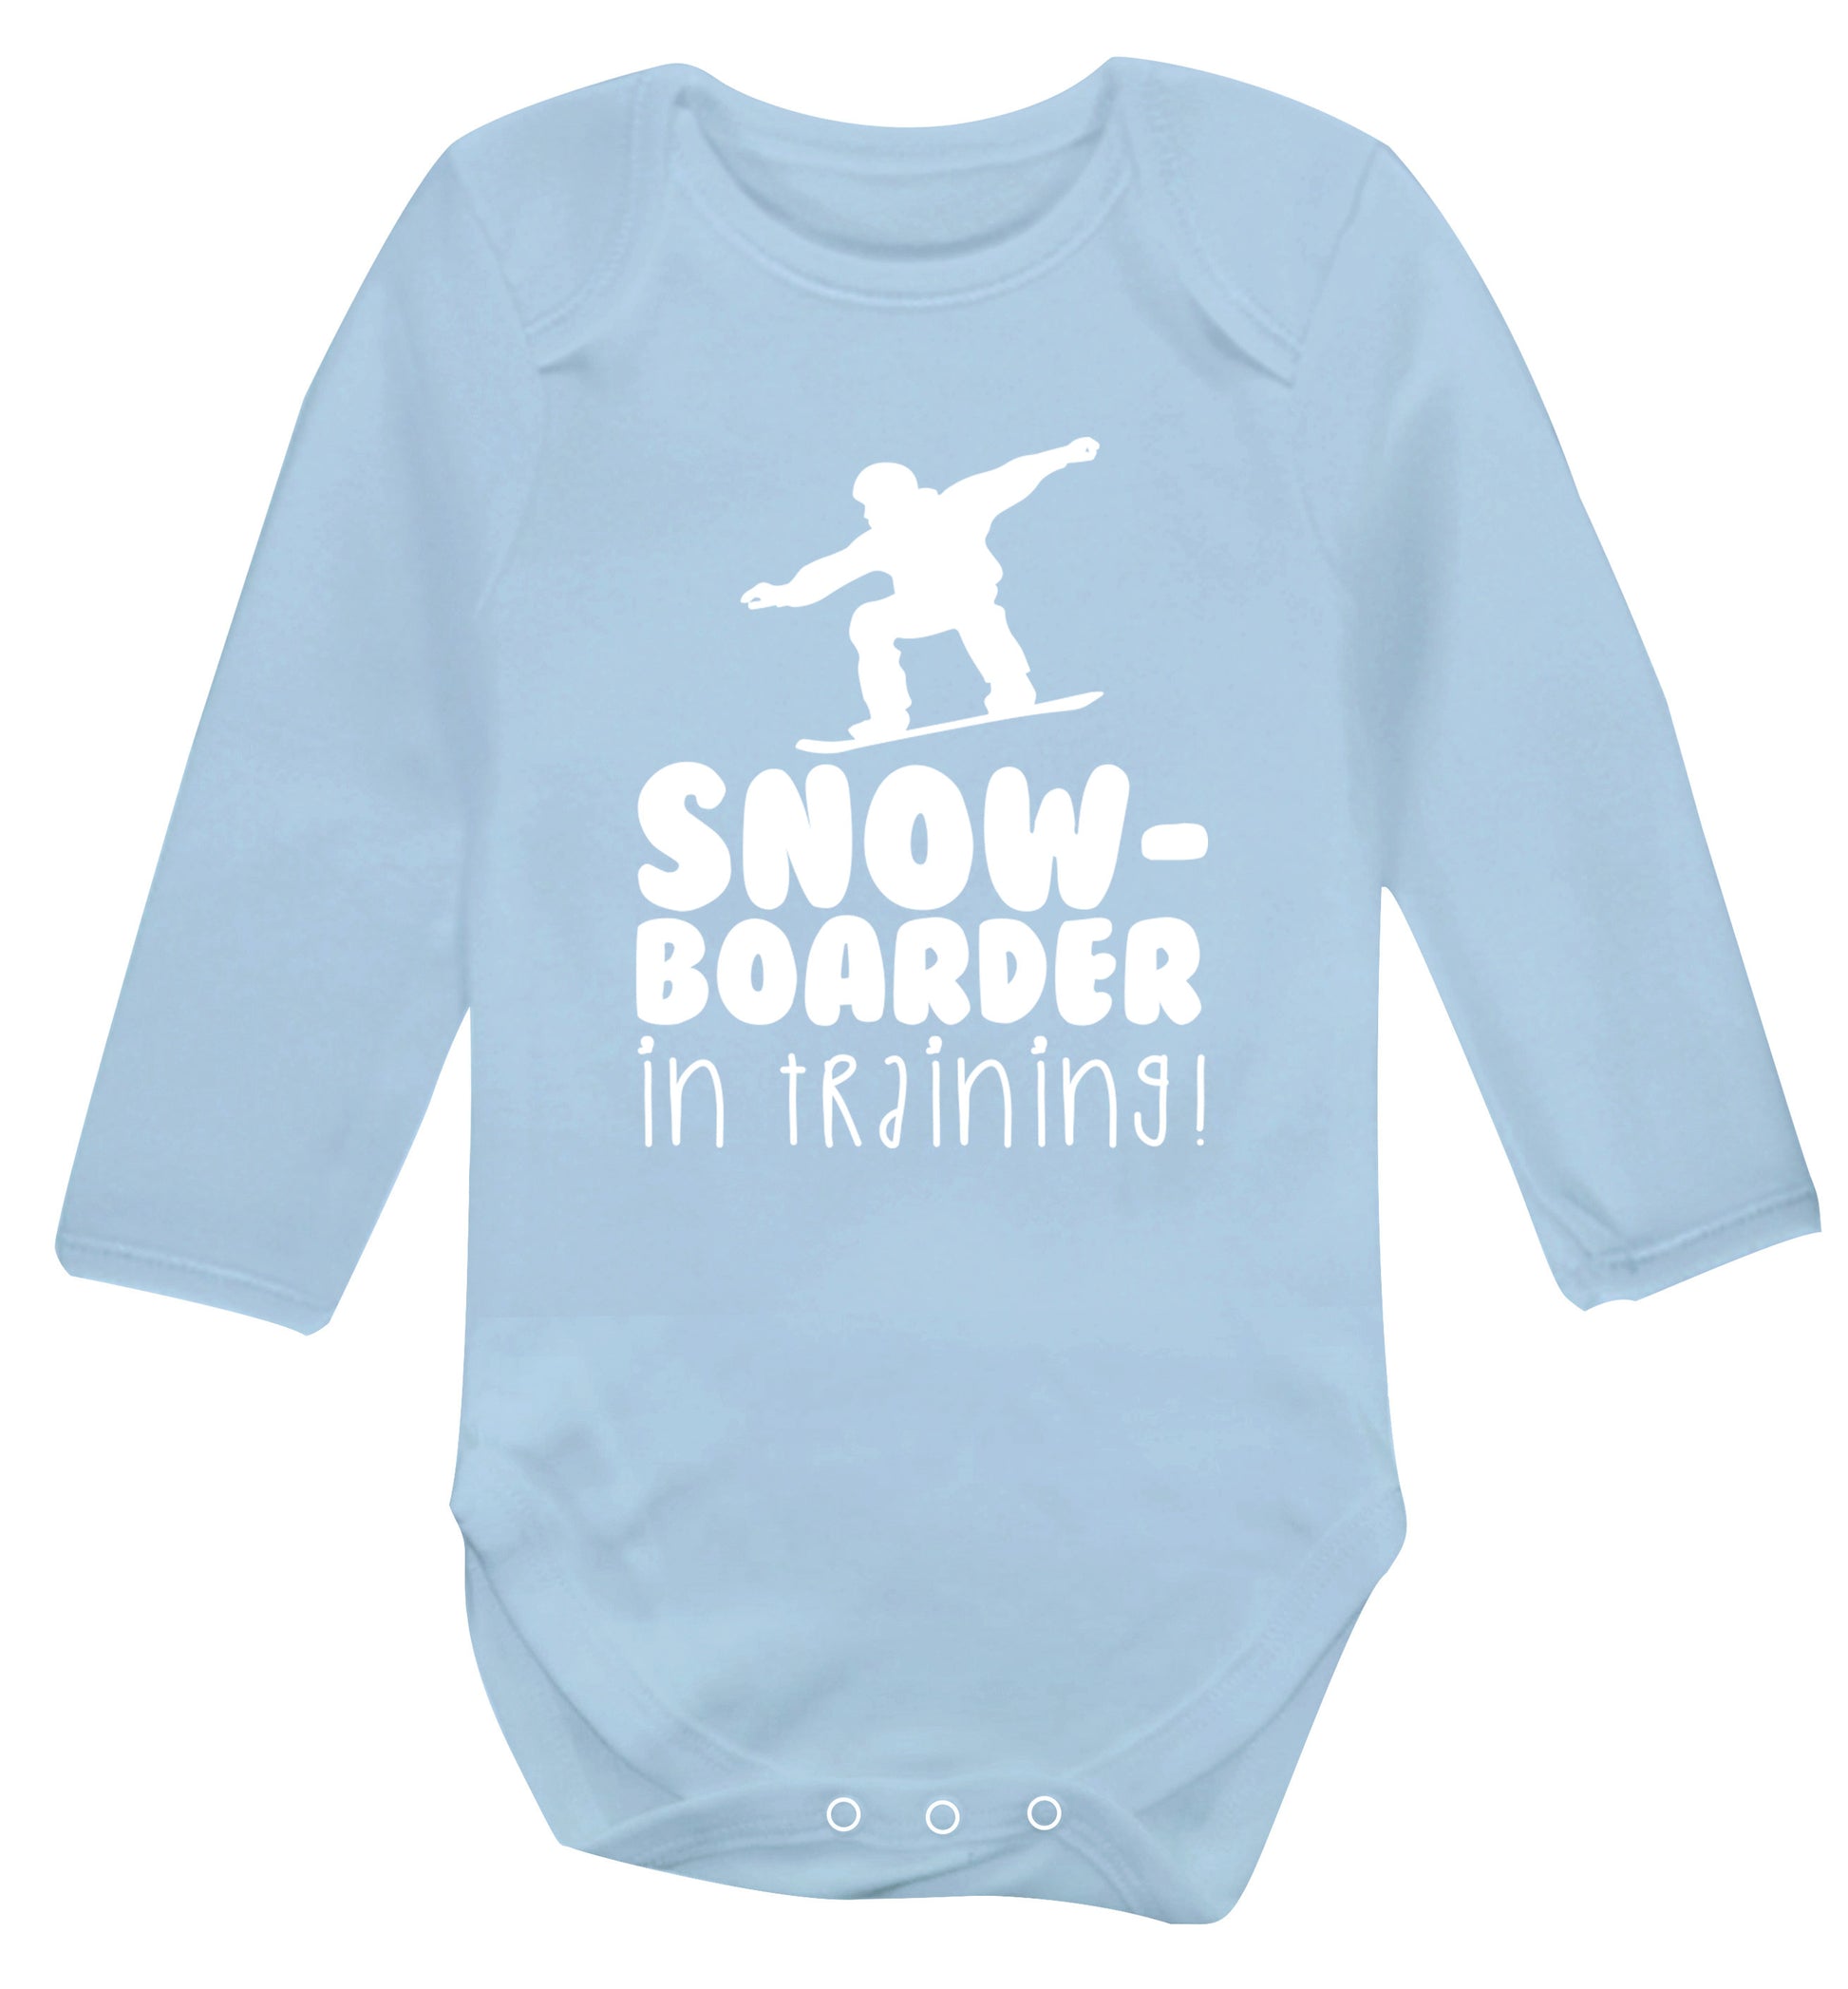 Snowboarder in training Baby Vest long sleeved pale blue 6-12 months